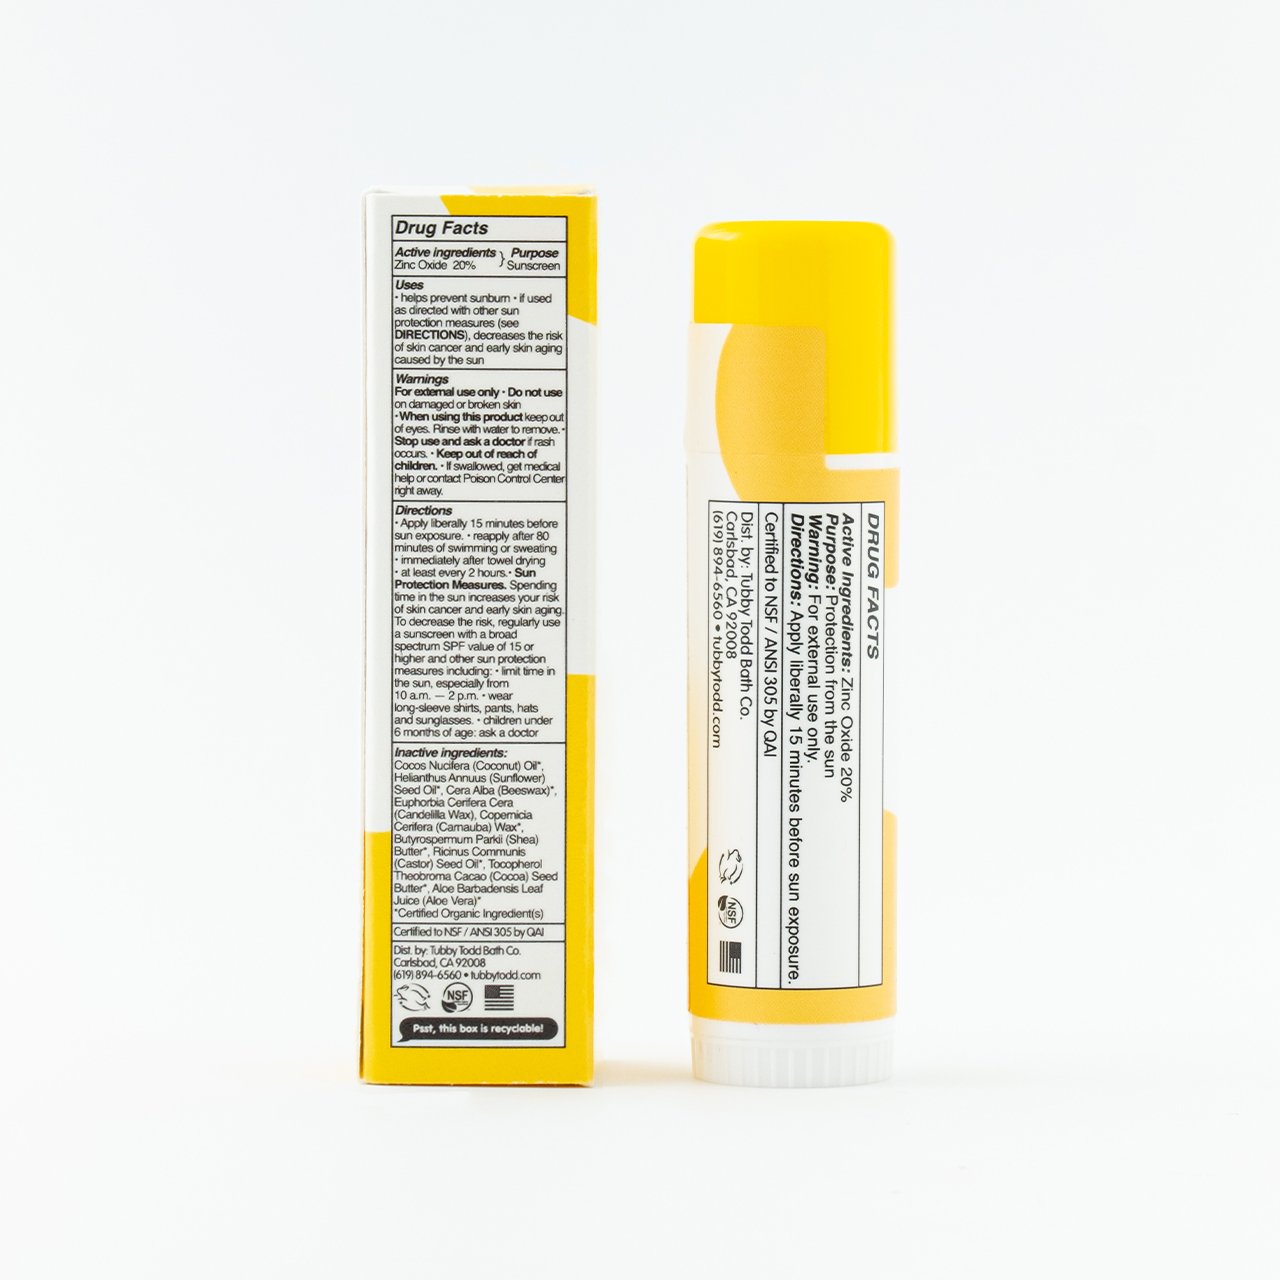 Back of Mineral Sunstick product and box showing Drug Facts